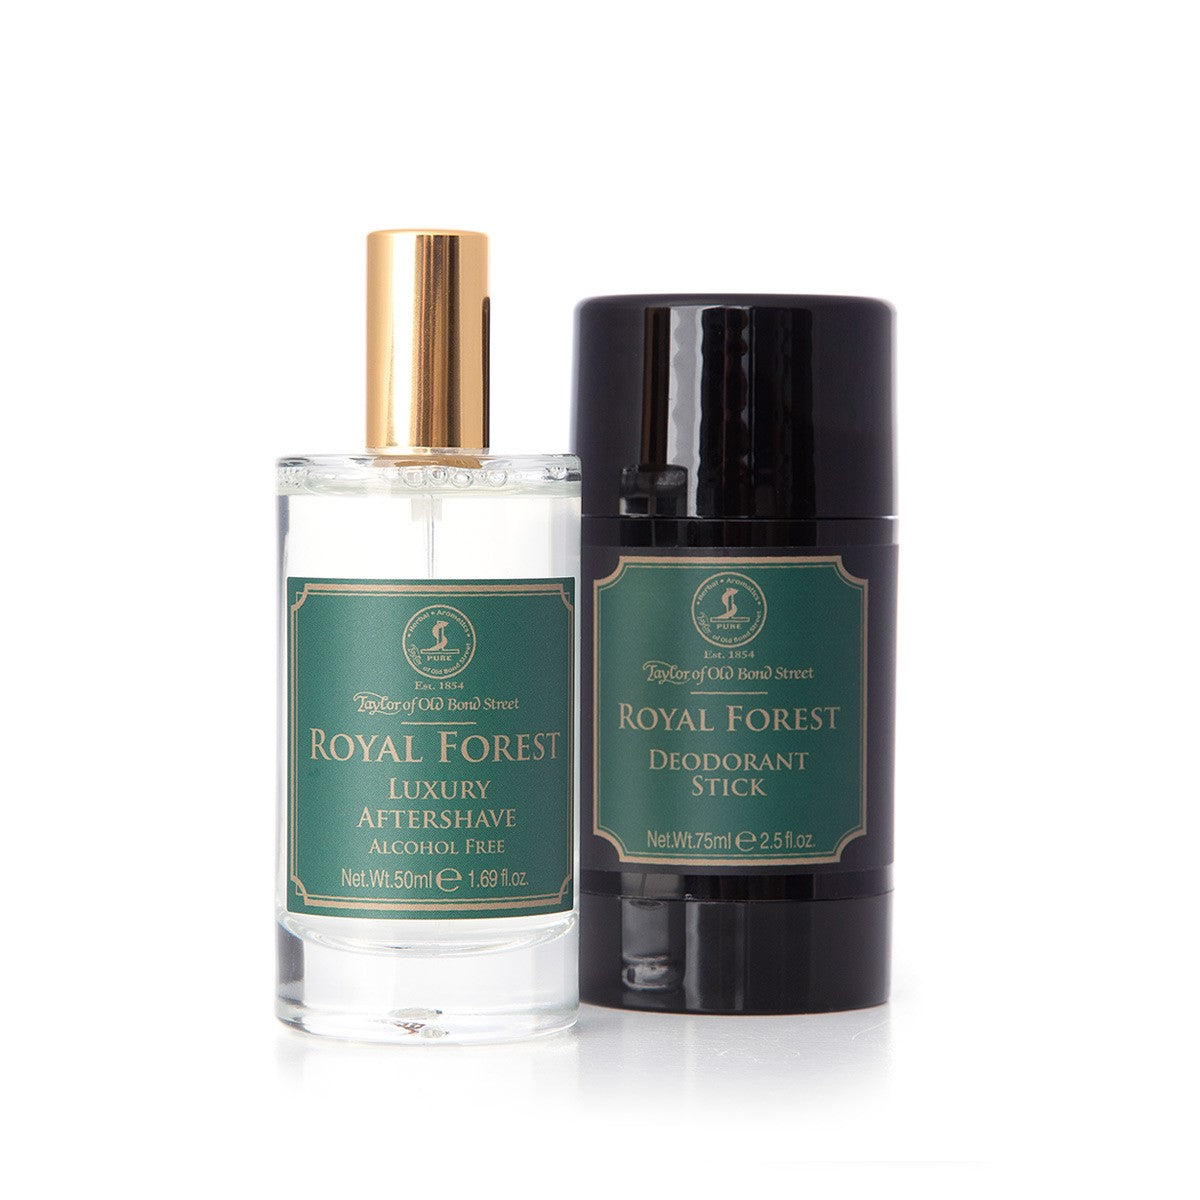 Royal Forest Aftershave and Deodorant Gift Set - Taylor of Old Bond Street